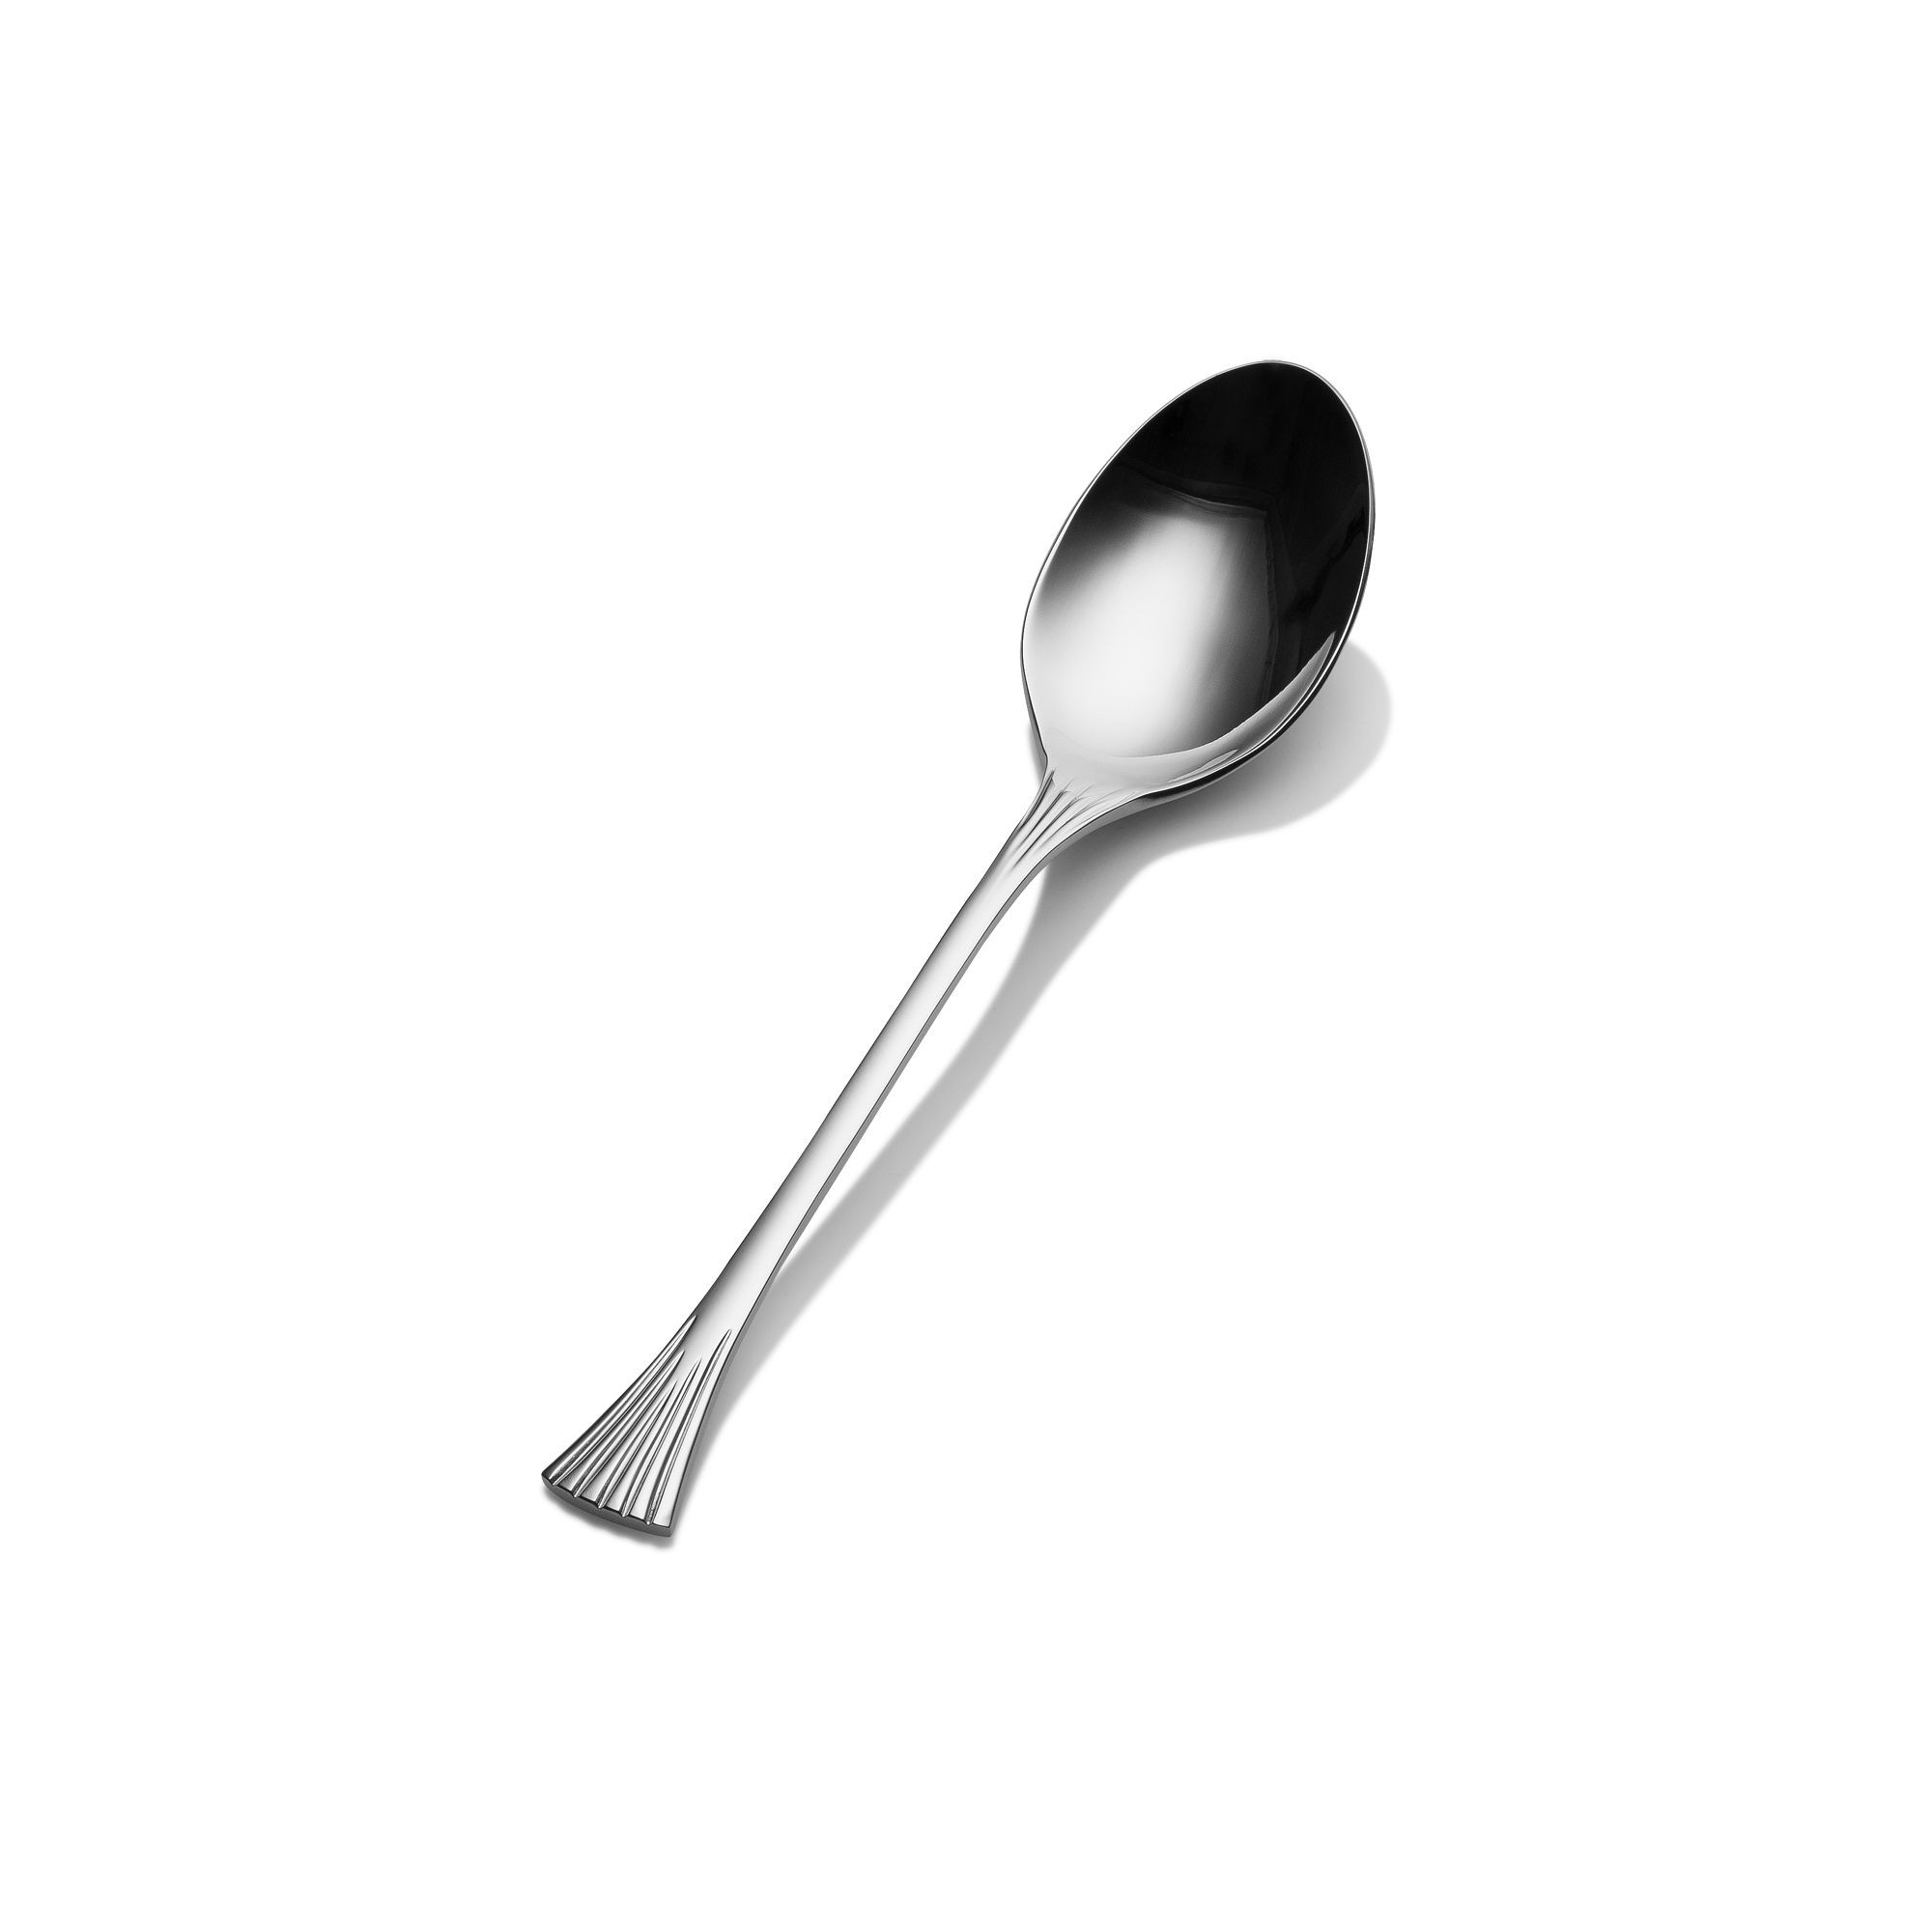 Bon Chef S2803 Mimosa 18/8 Stainless Steel Soup and Dessert Spoon